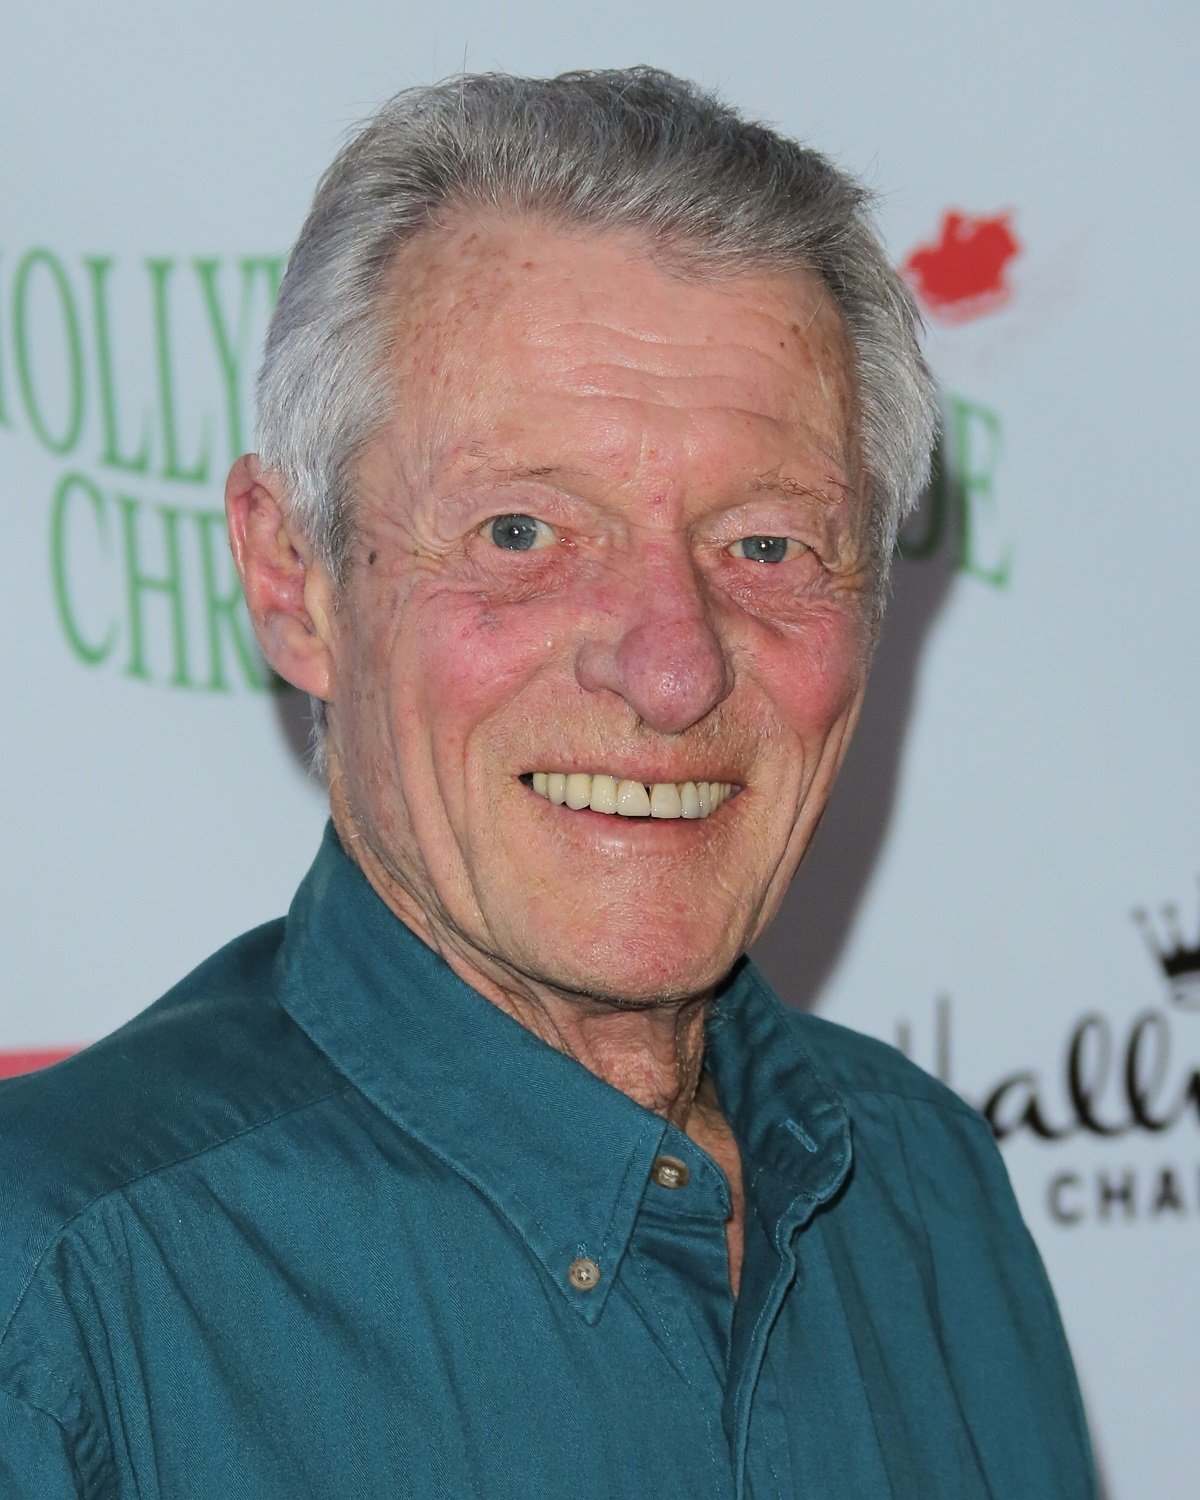 Ken Osmond attends The Hollywood Christmas Parade in 2013